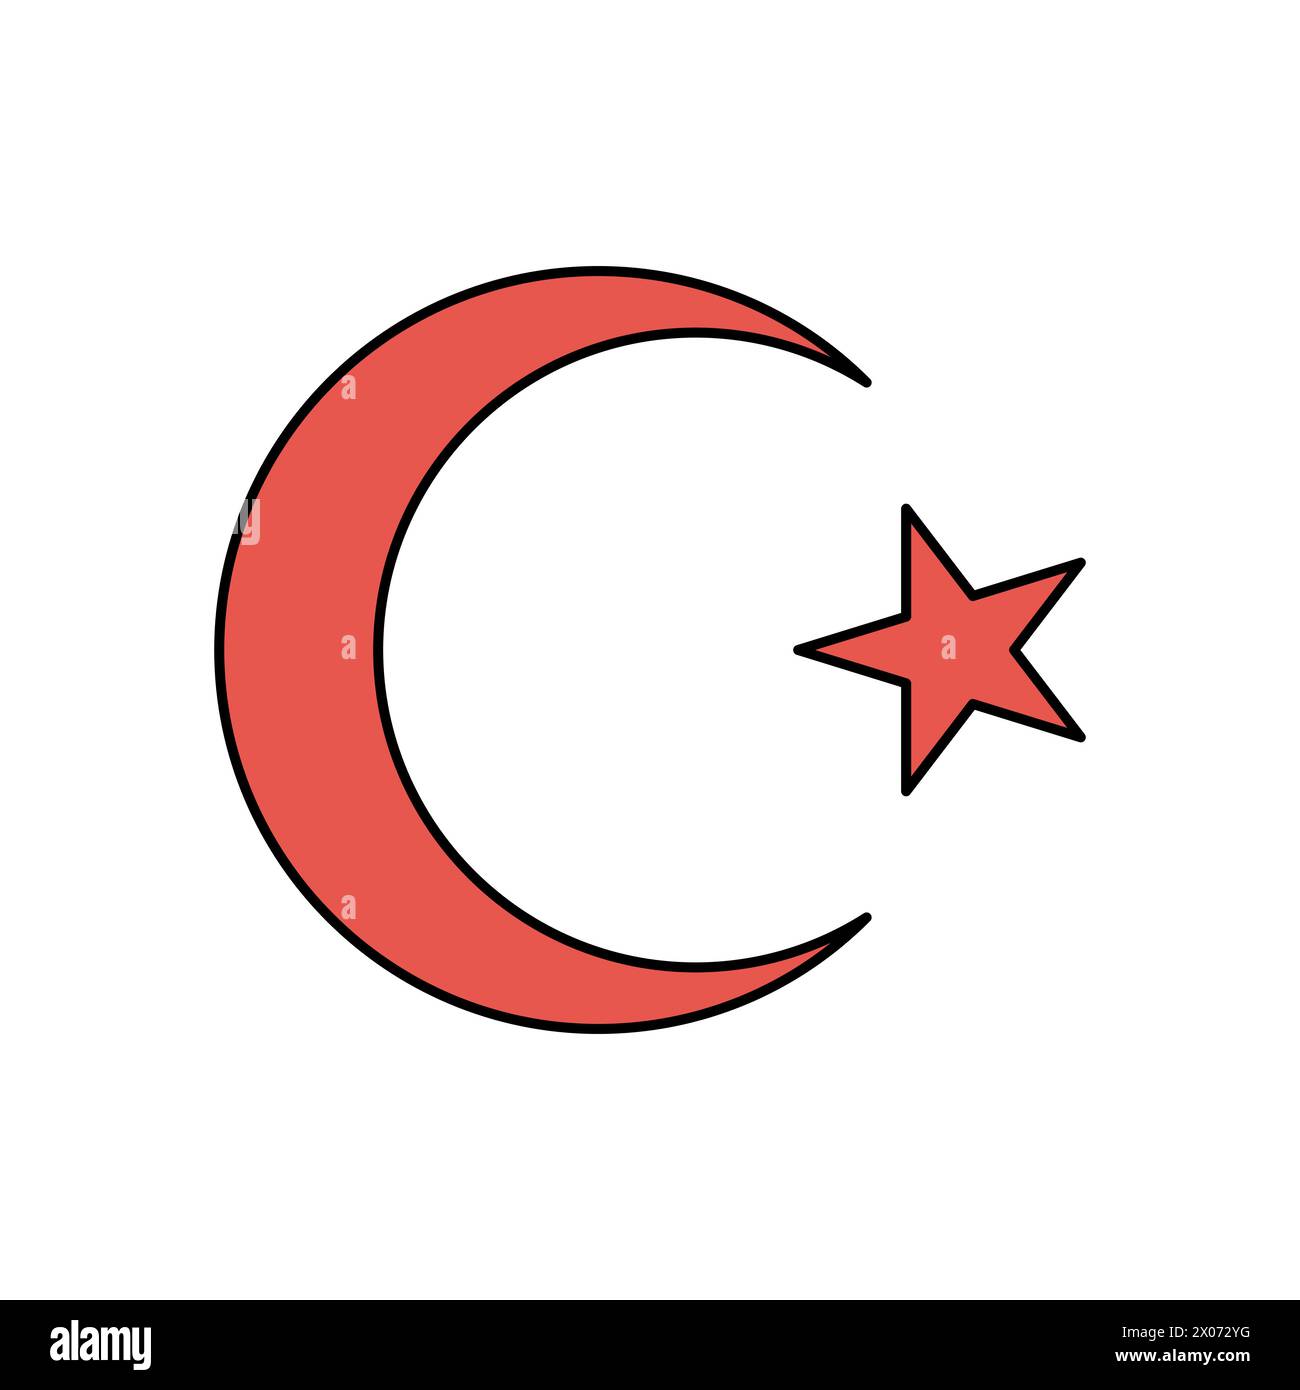 Turkish flag symbol - star and crescent. Vector illustration isolated on white. Stock Vector